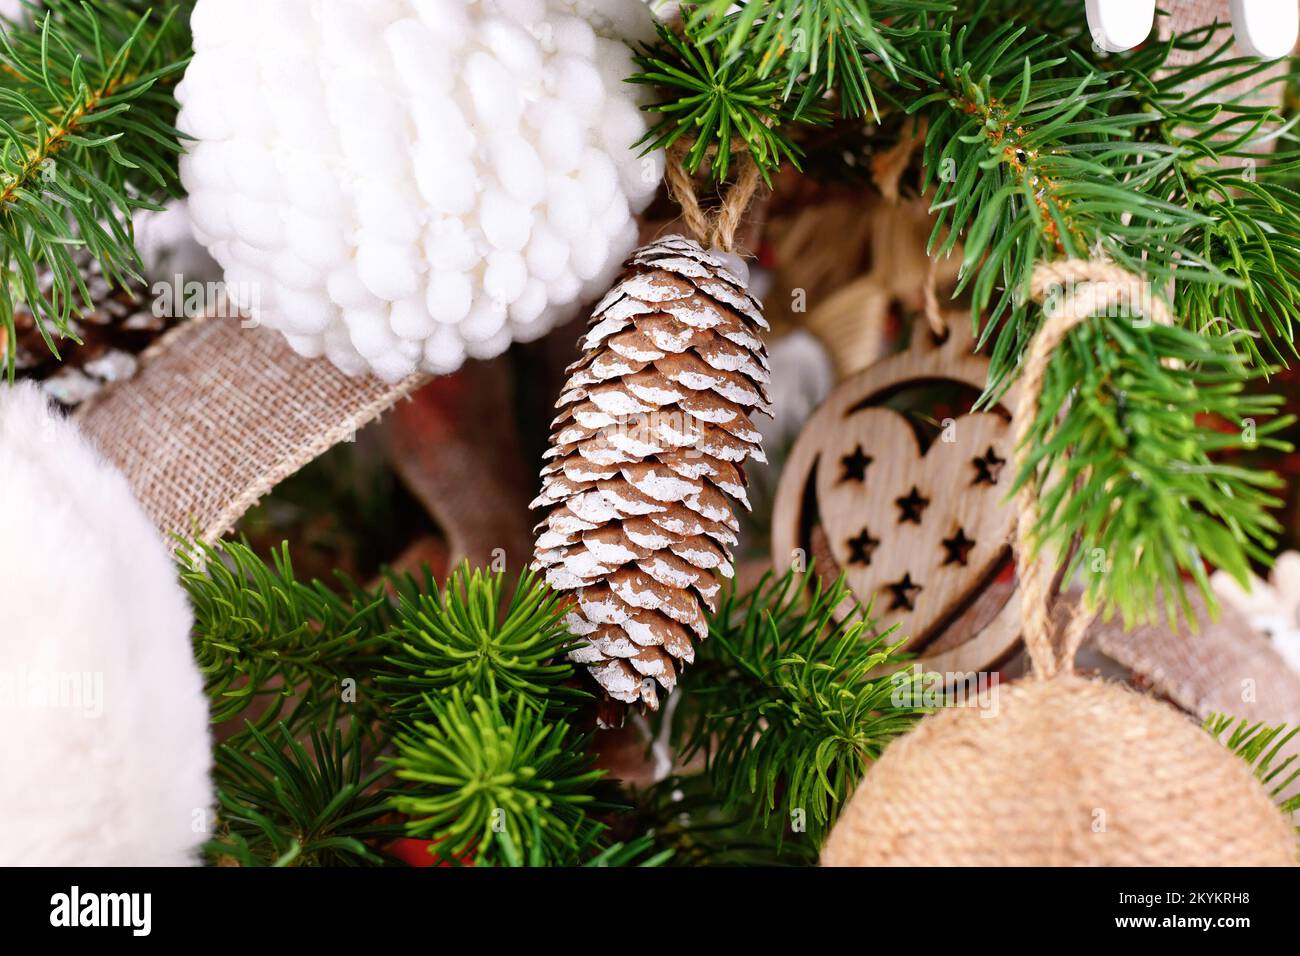 Natural Christmas tree ornament bauble made from pine cone with white paint Stock Photo